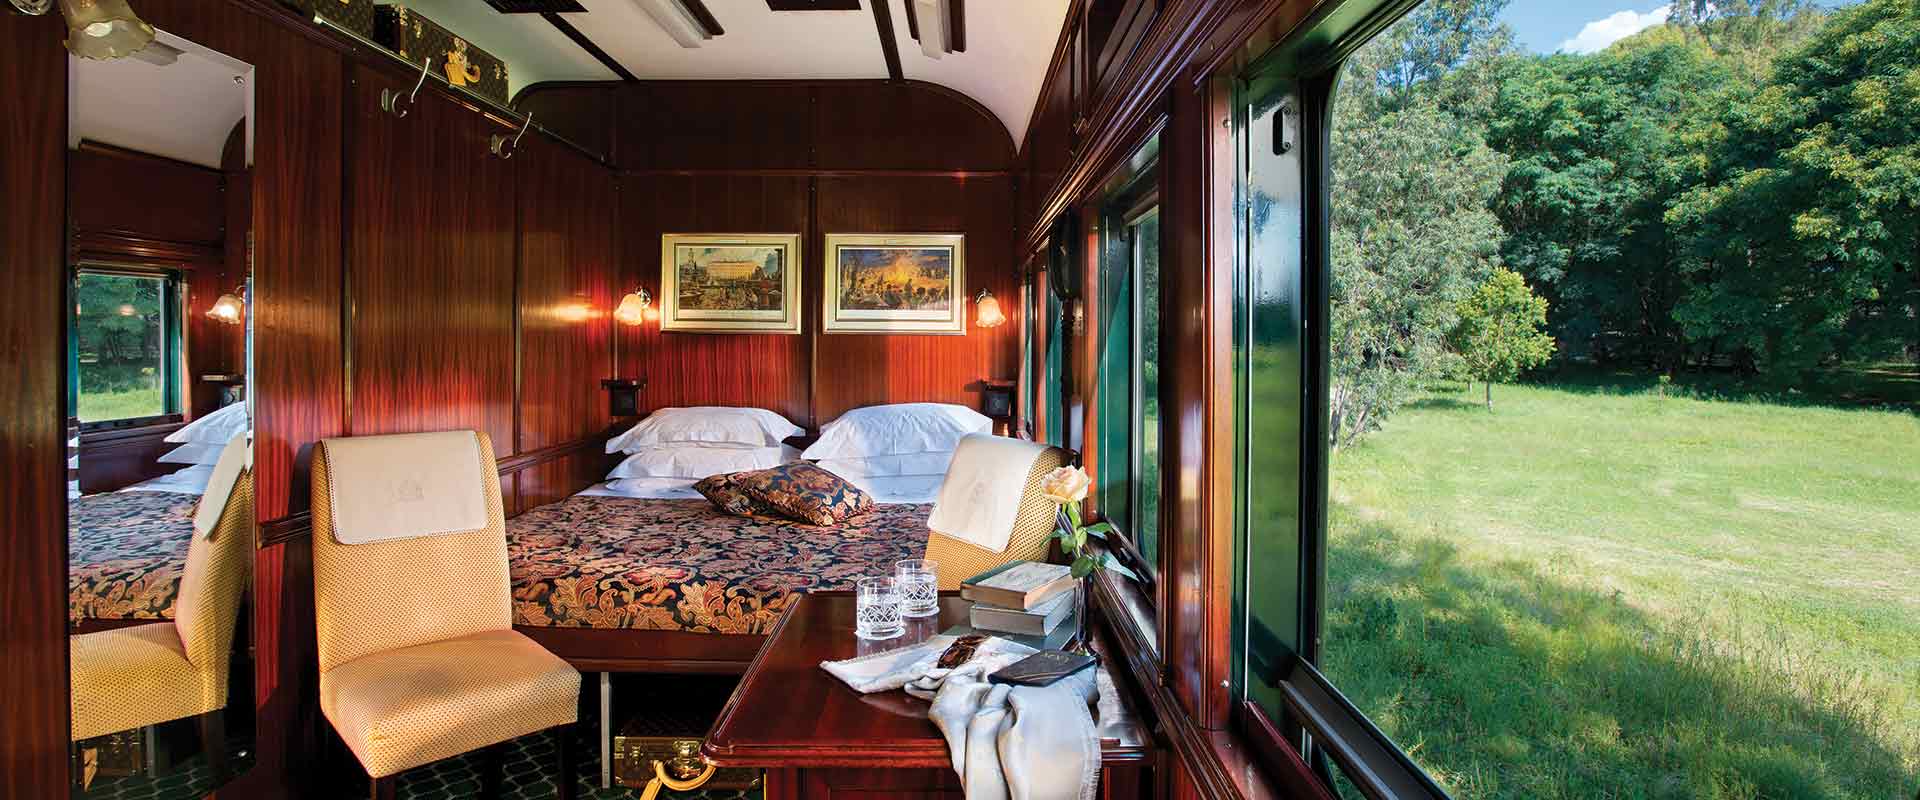 interior of deluxe double suite on rovos rail train, africa